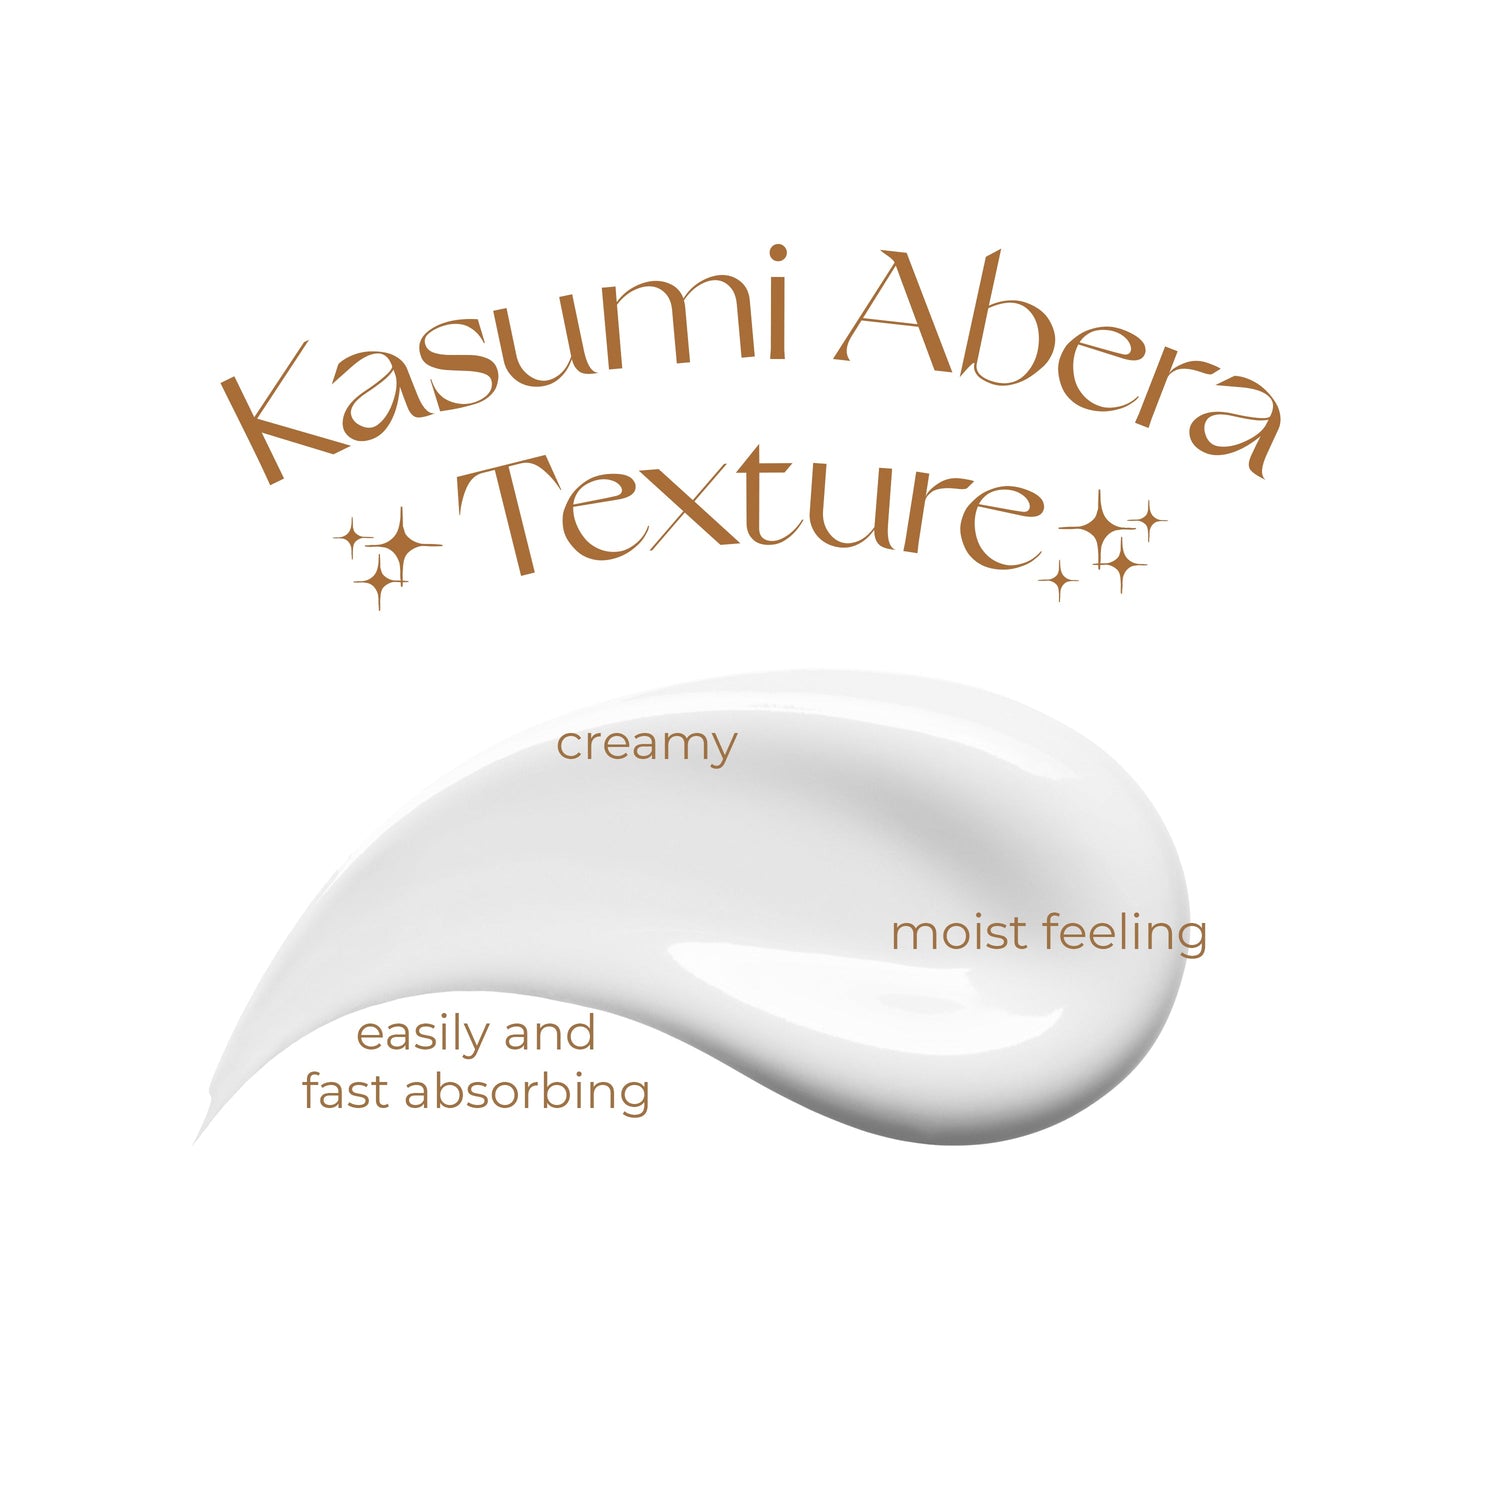 FLASH SALE 70% ABERA - Gift For Mom | Kasumi Abera Skin Glowing Cream - Pack of 1, 2 or 3 - Anti-aging, Facial Skin Care, Extensive Moisturizer - INDEPENDENCE DAY SALE OFF 70% - CS